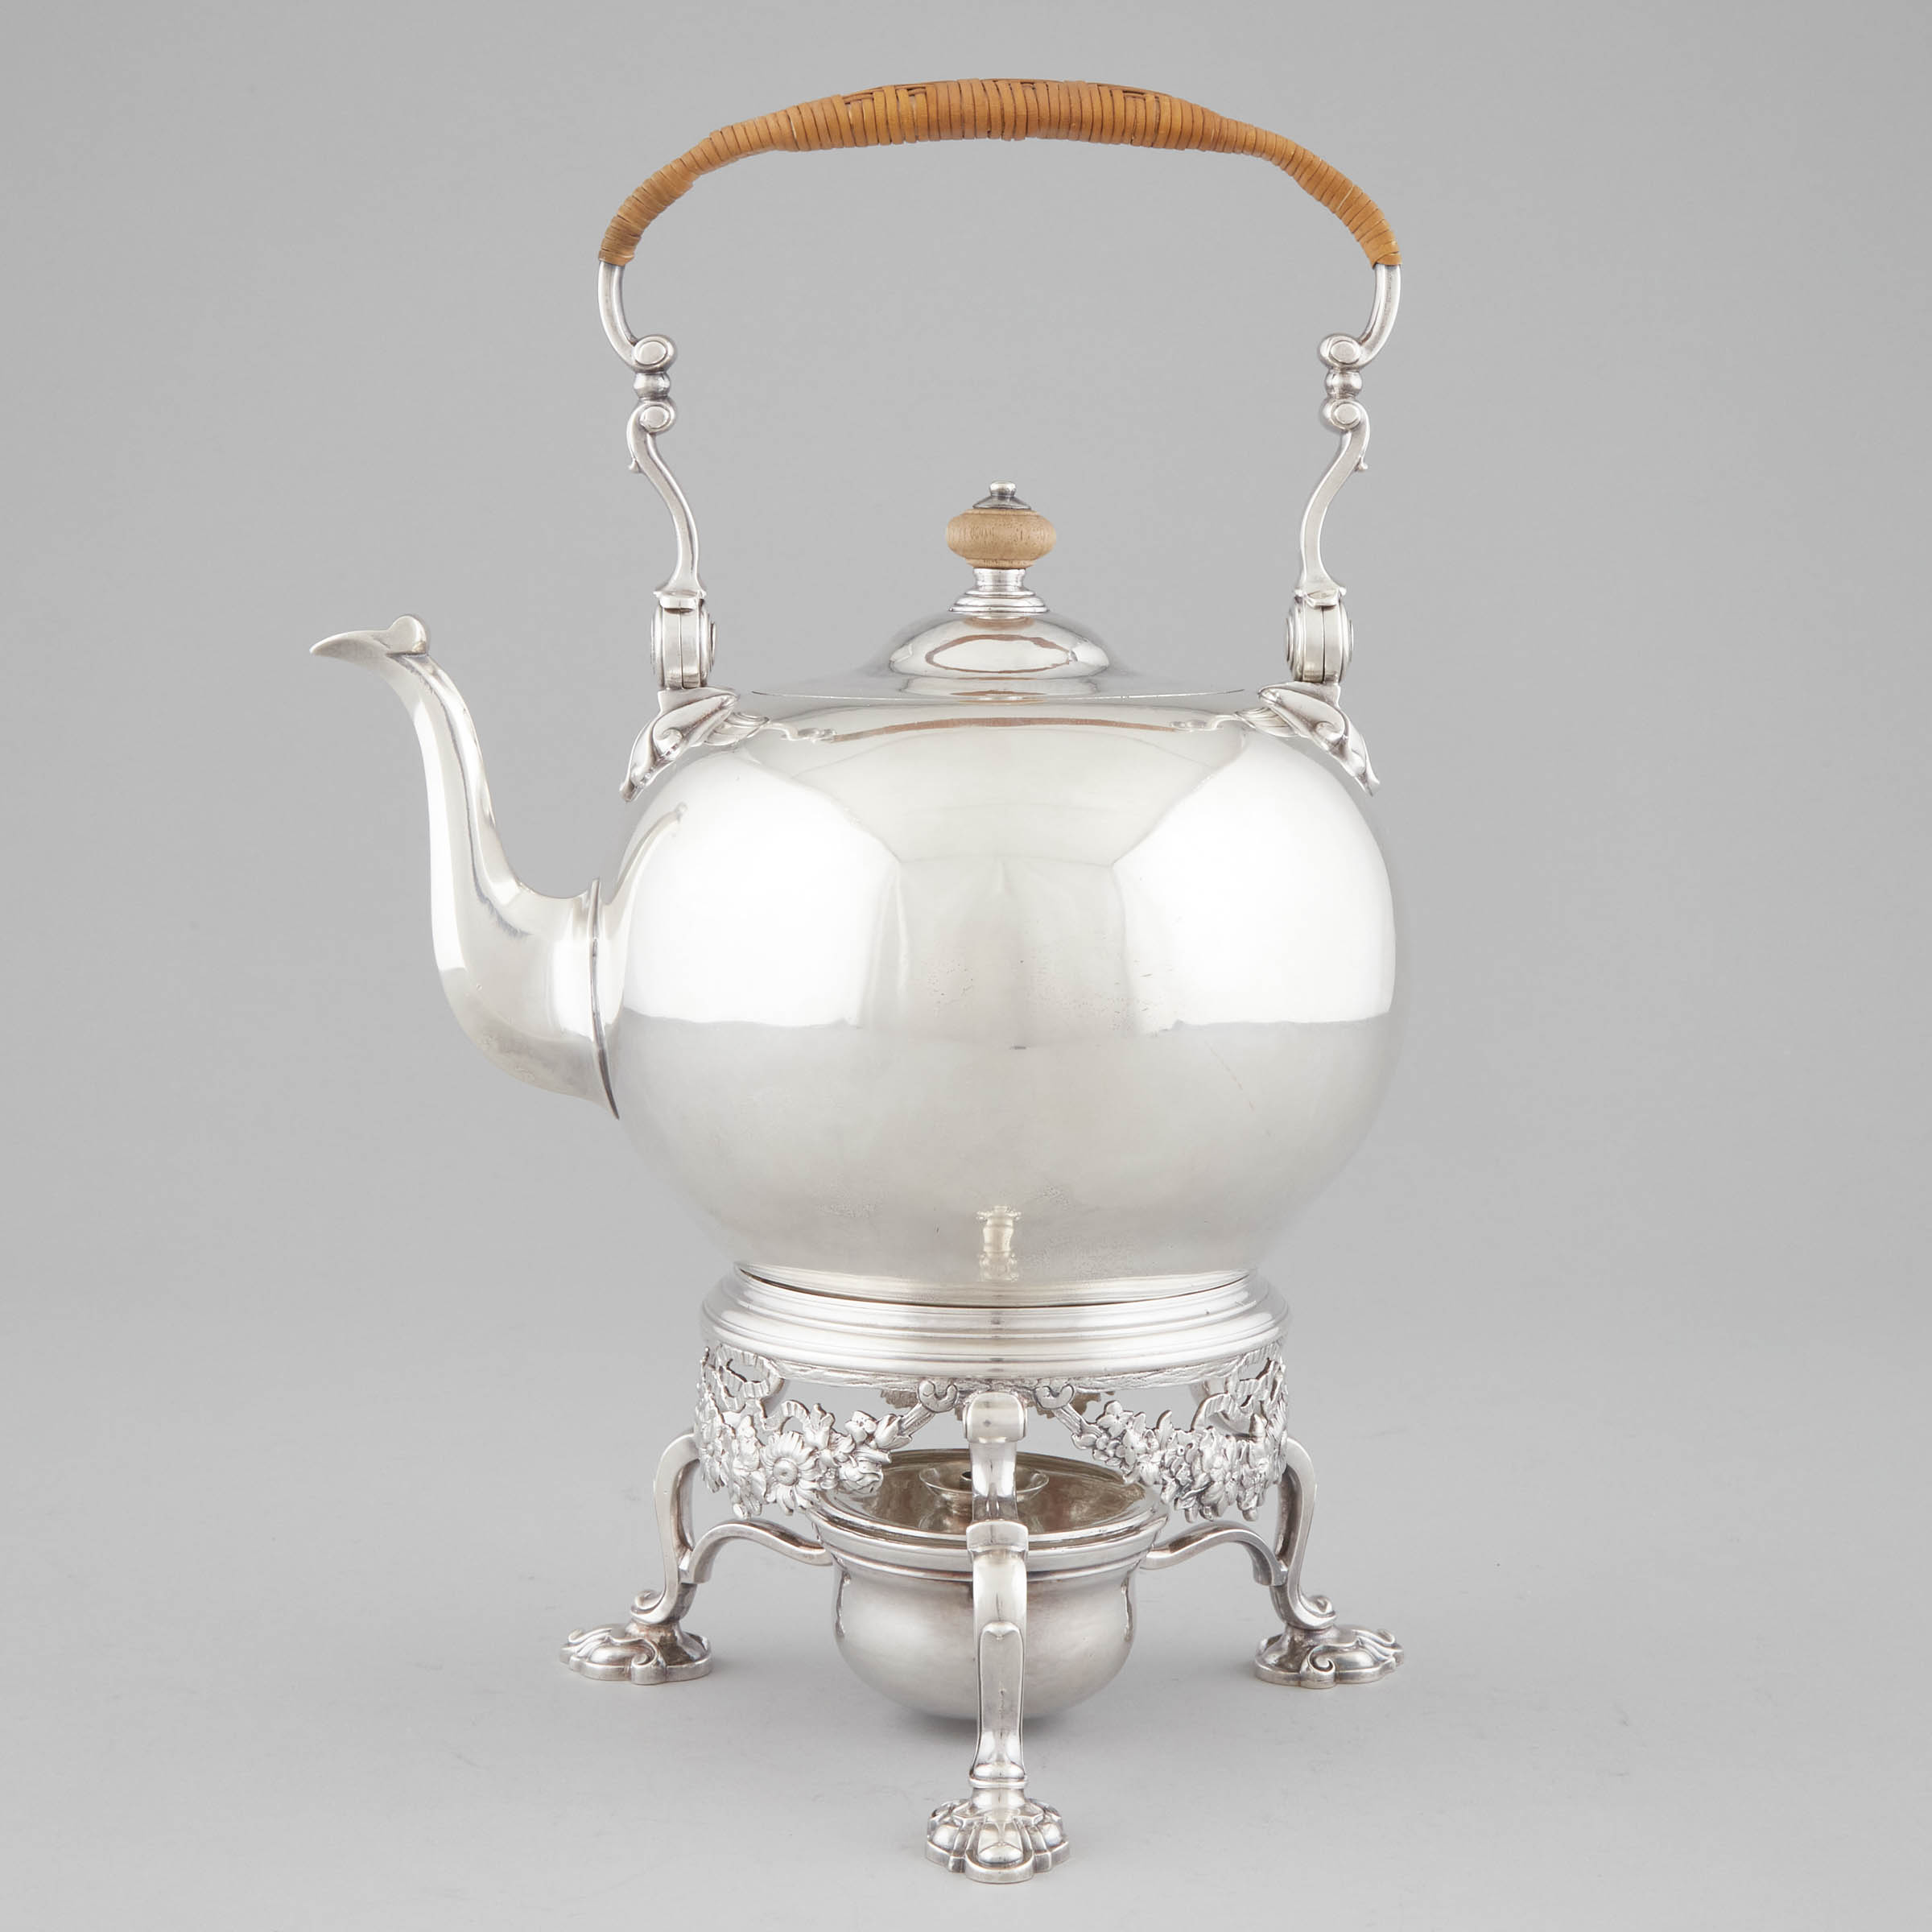 George II Silver Kettle on Lampstand,